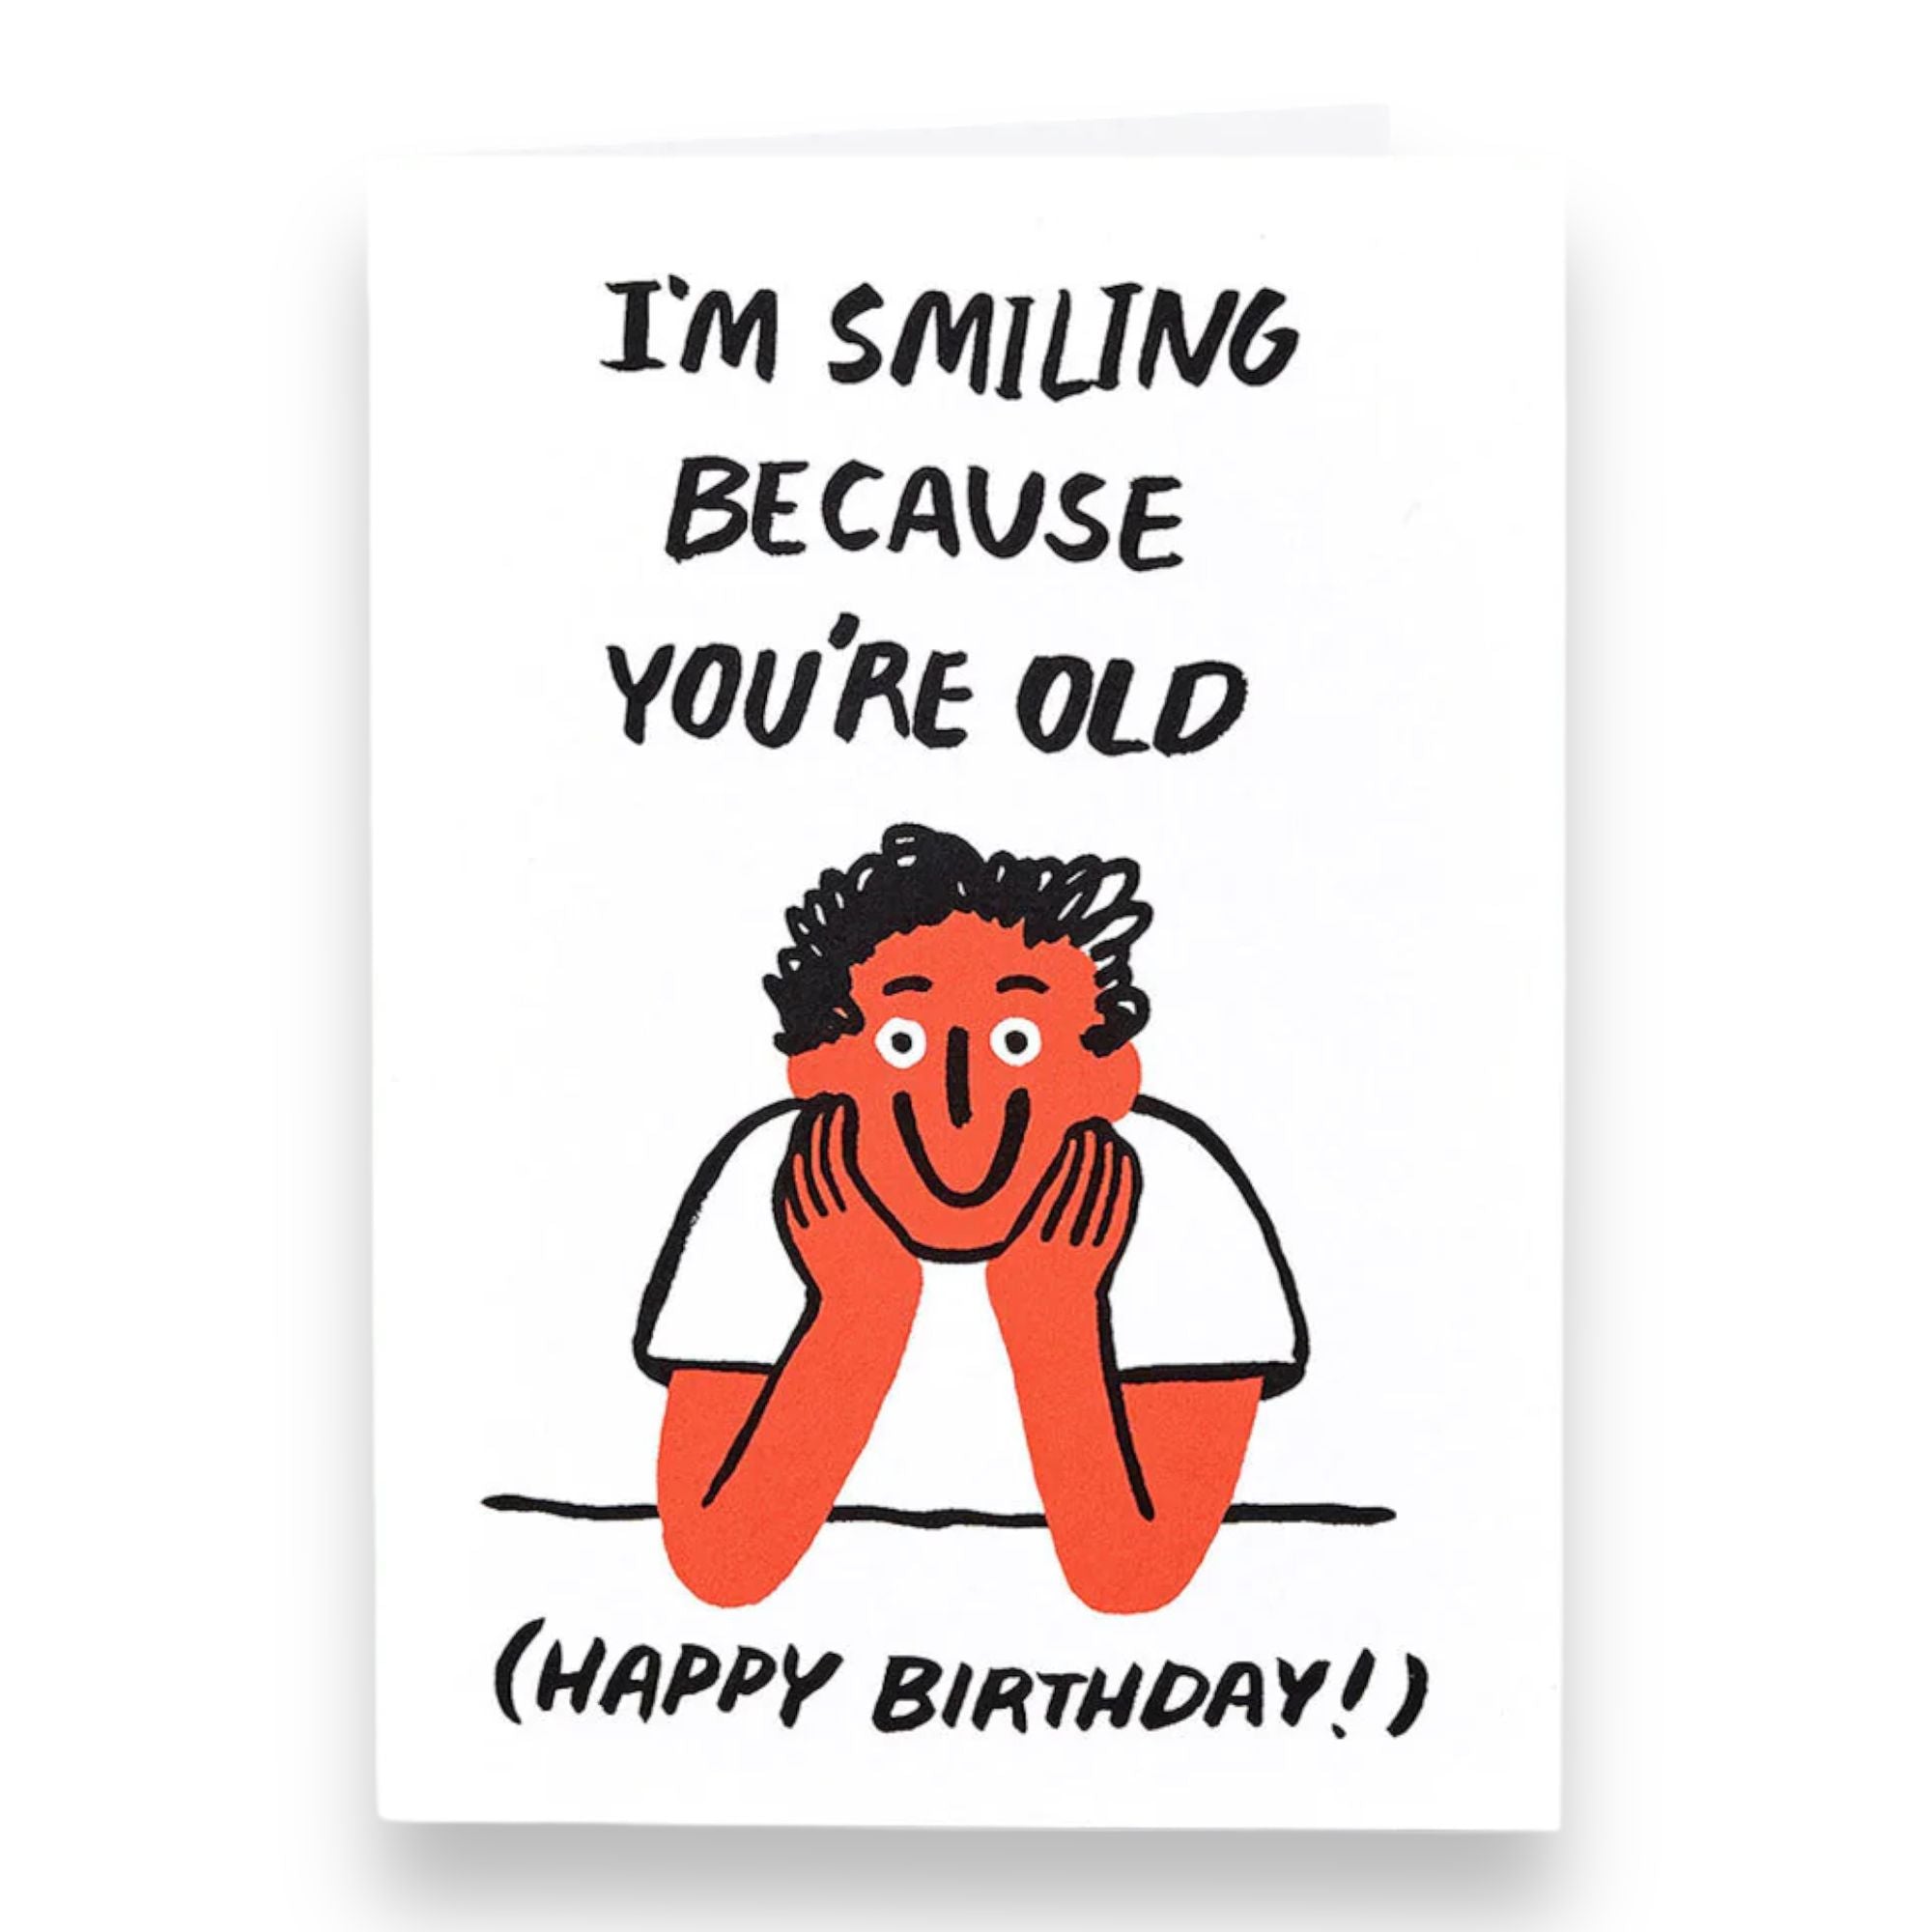 YOU'RE OLD GREETINGS CARD